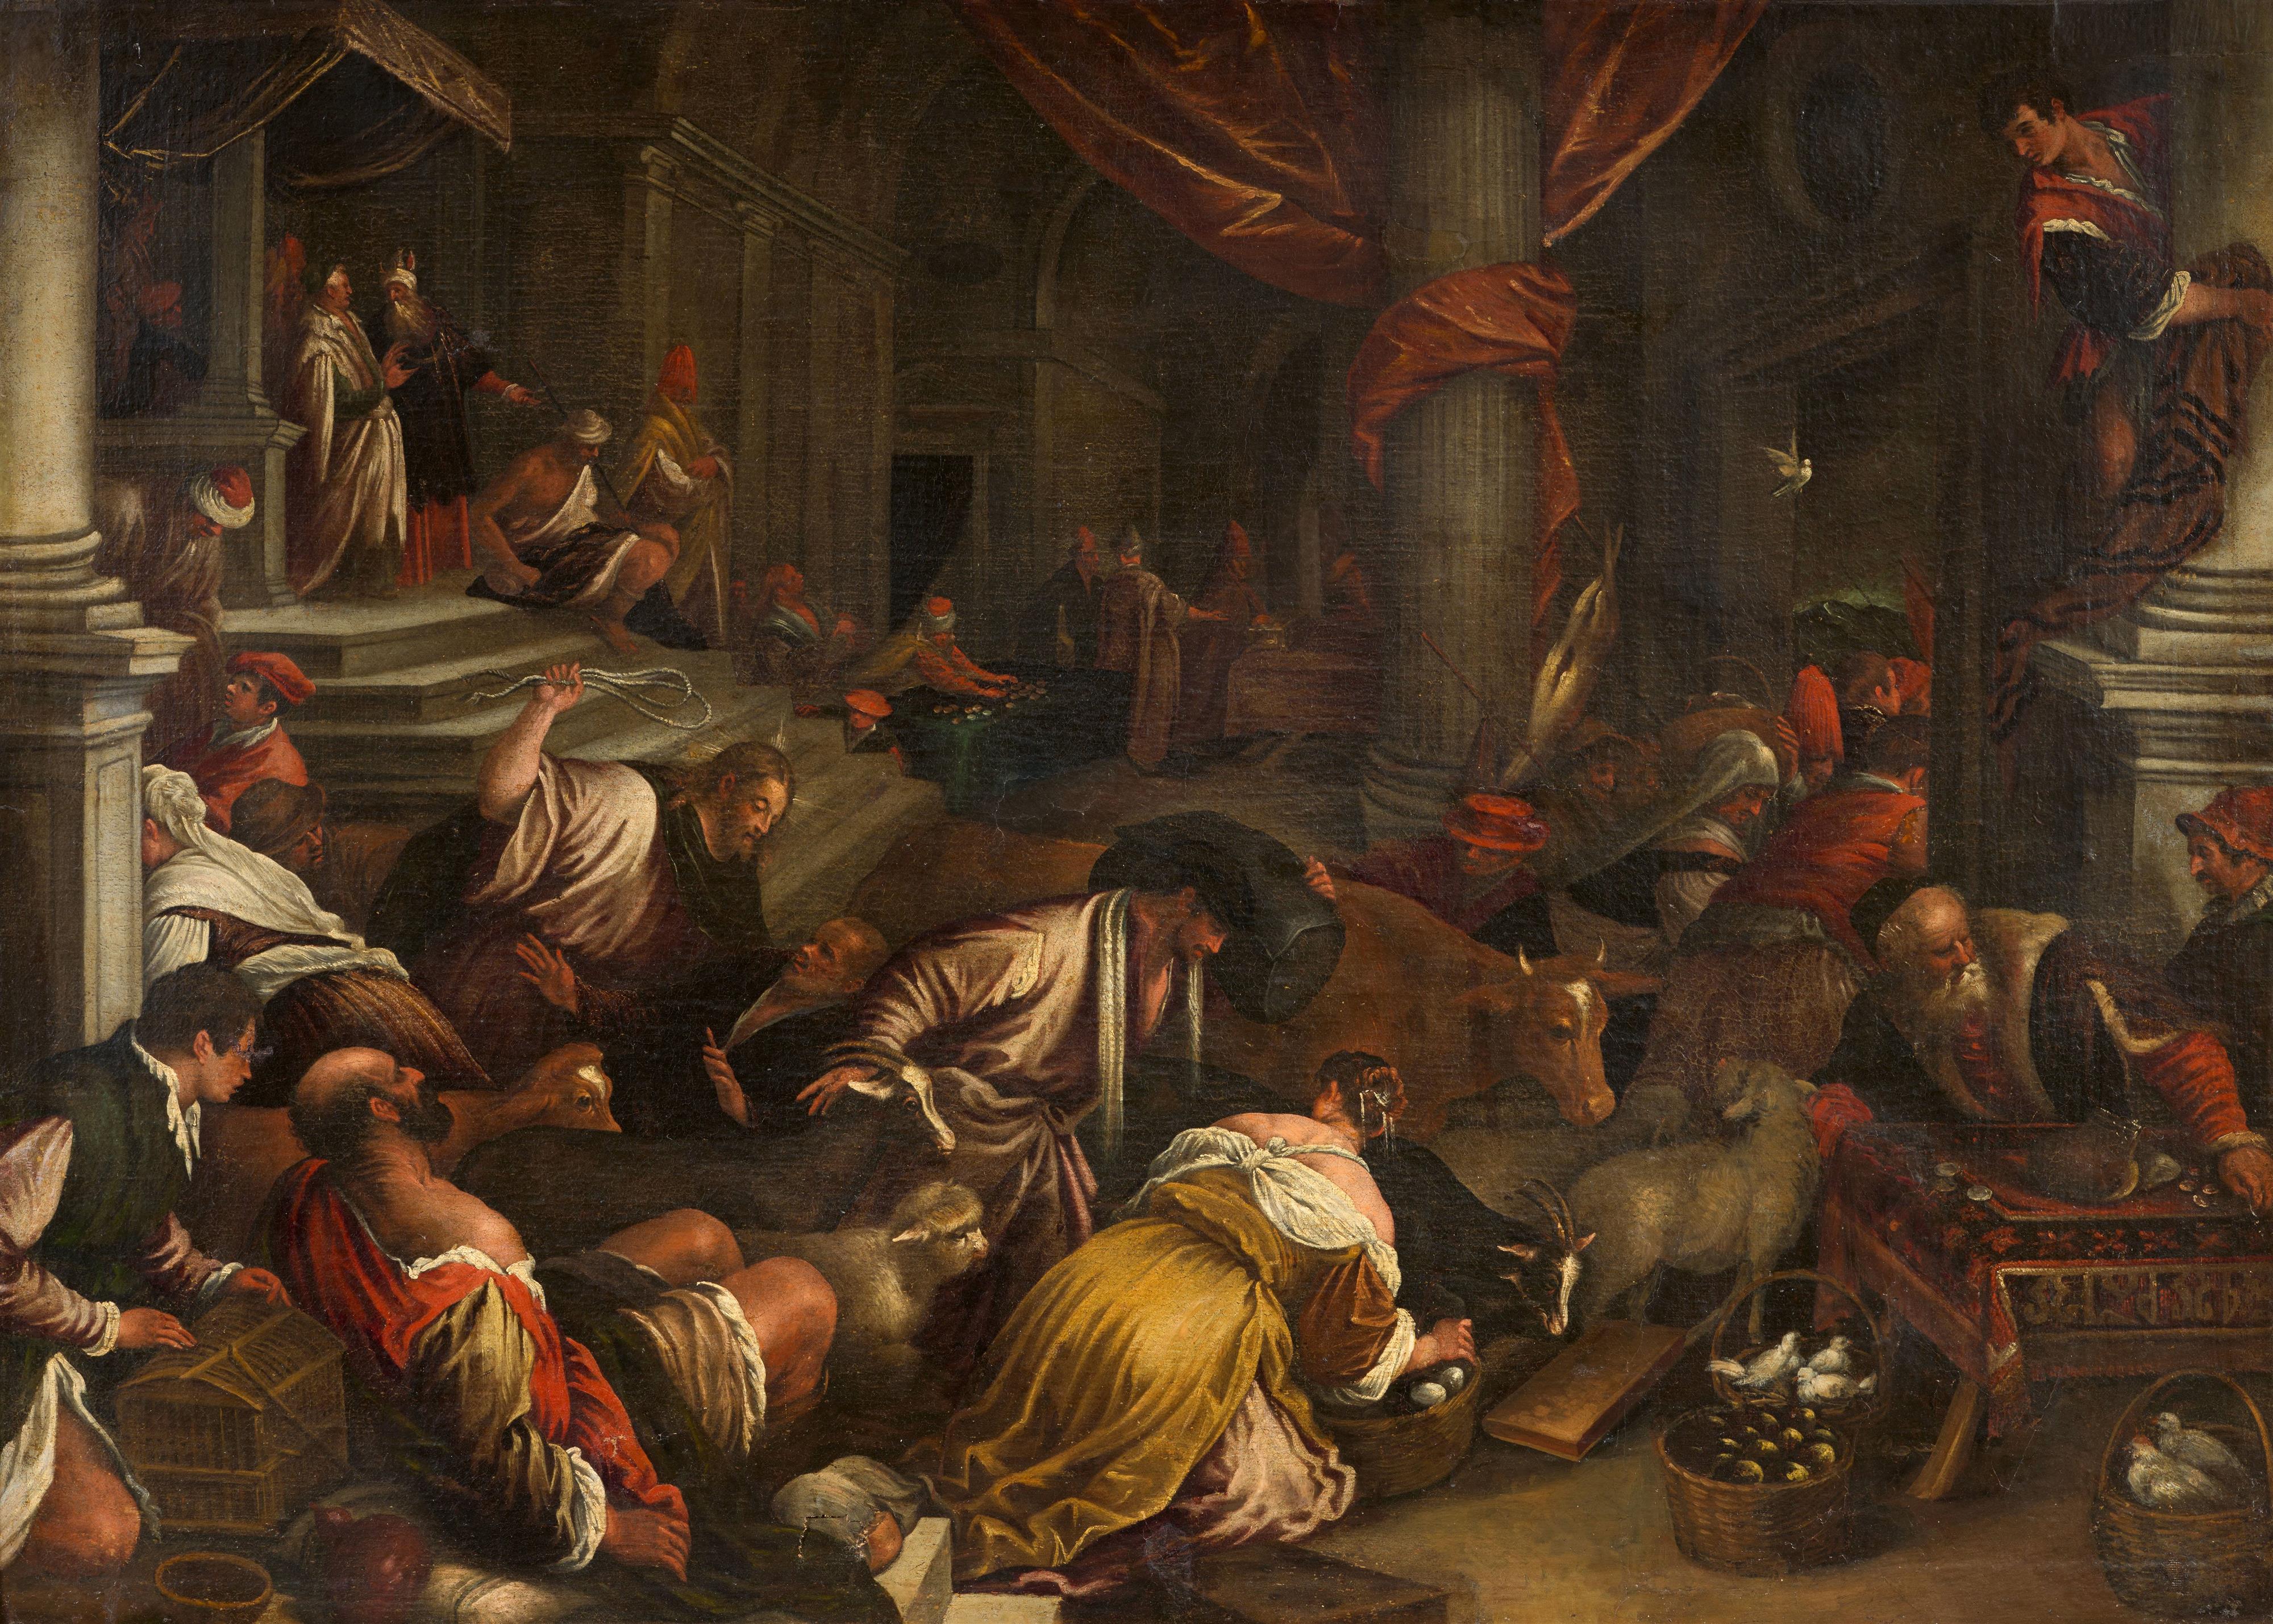 Leandro dal Ponte, called Leandro Bassano, studio of - Christ expelling the Money Lenders from the Temple - image-1